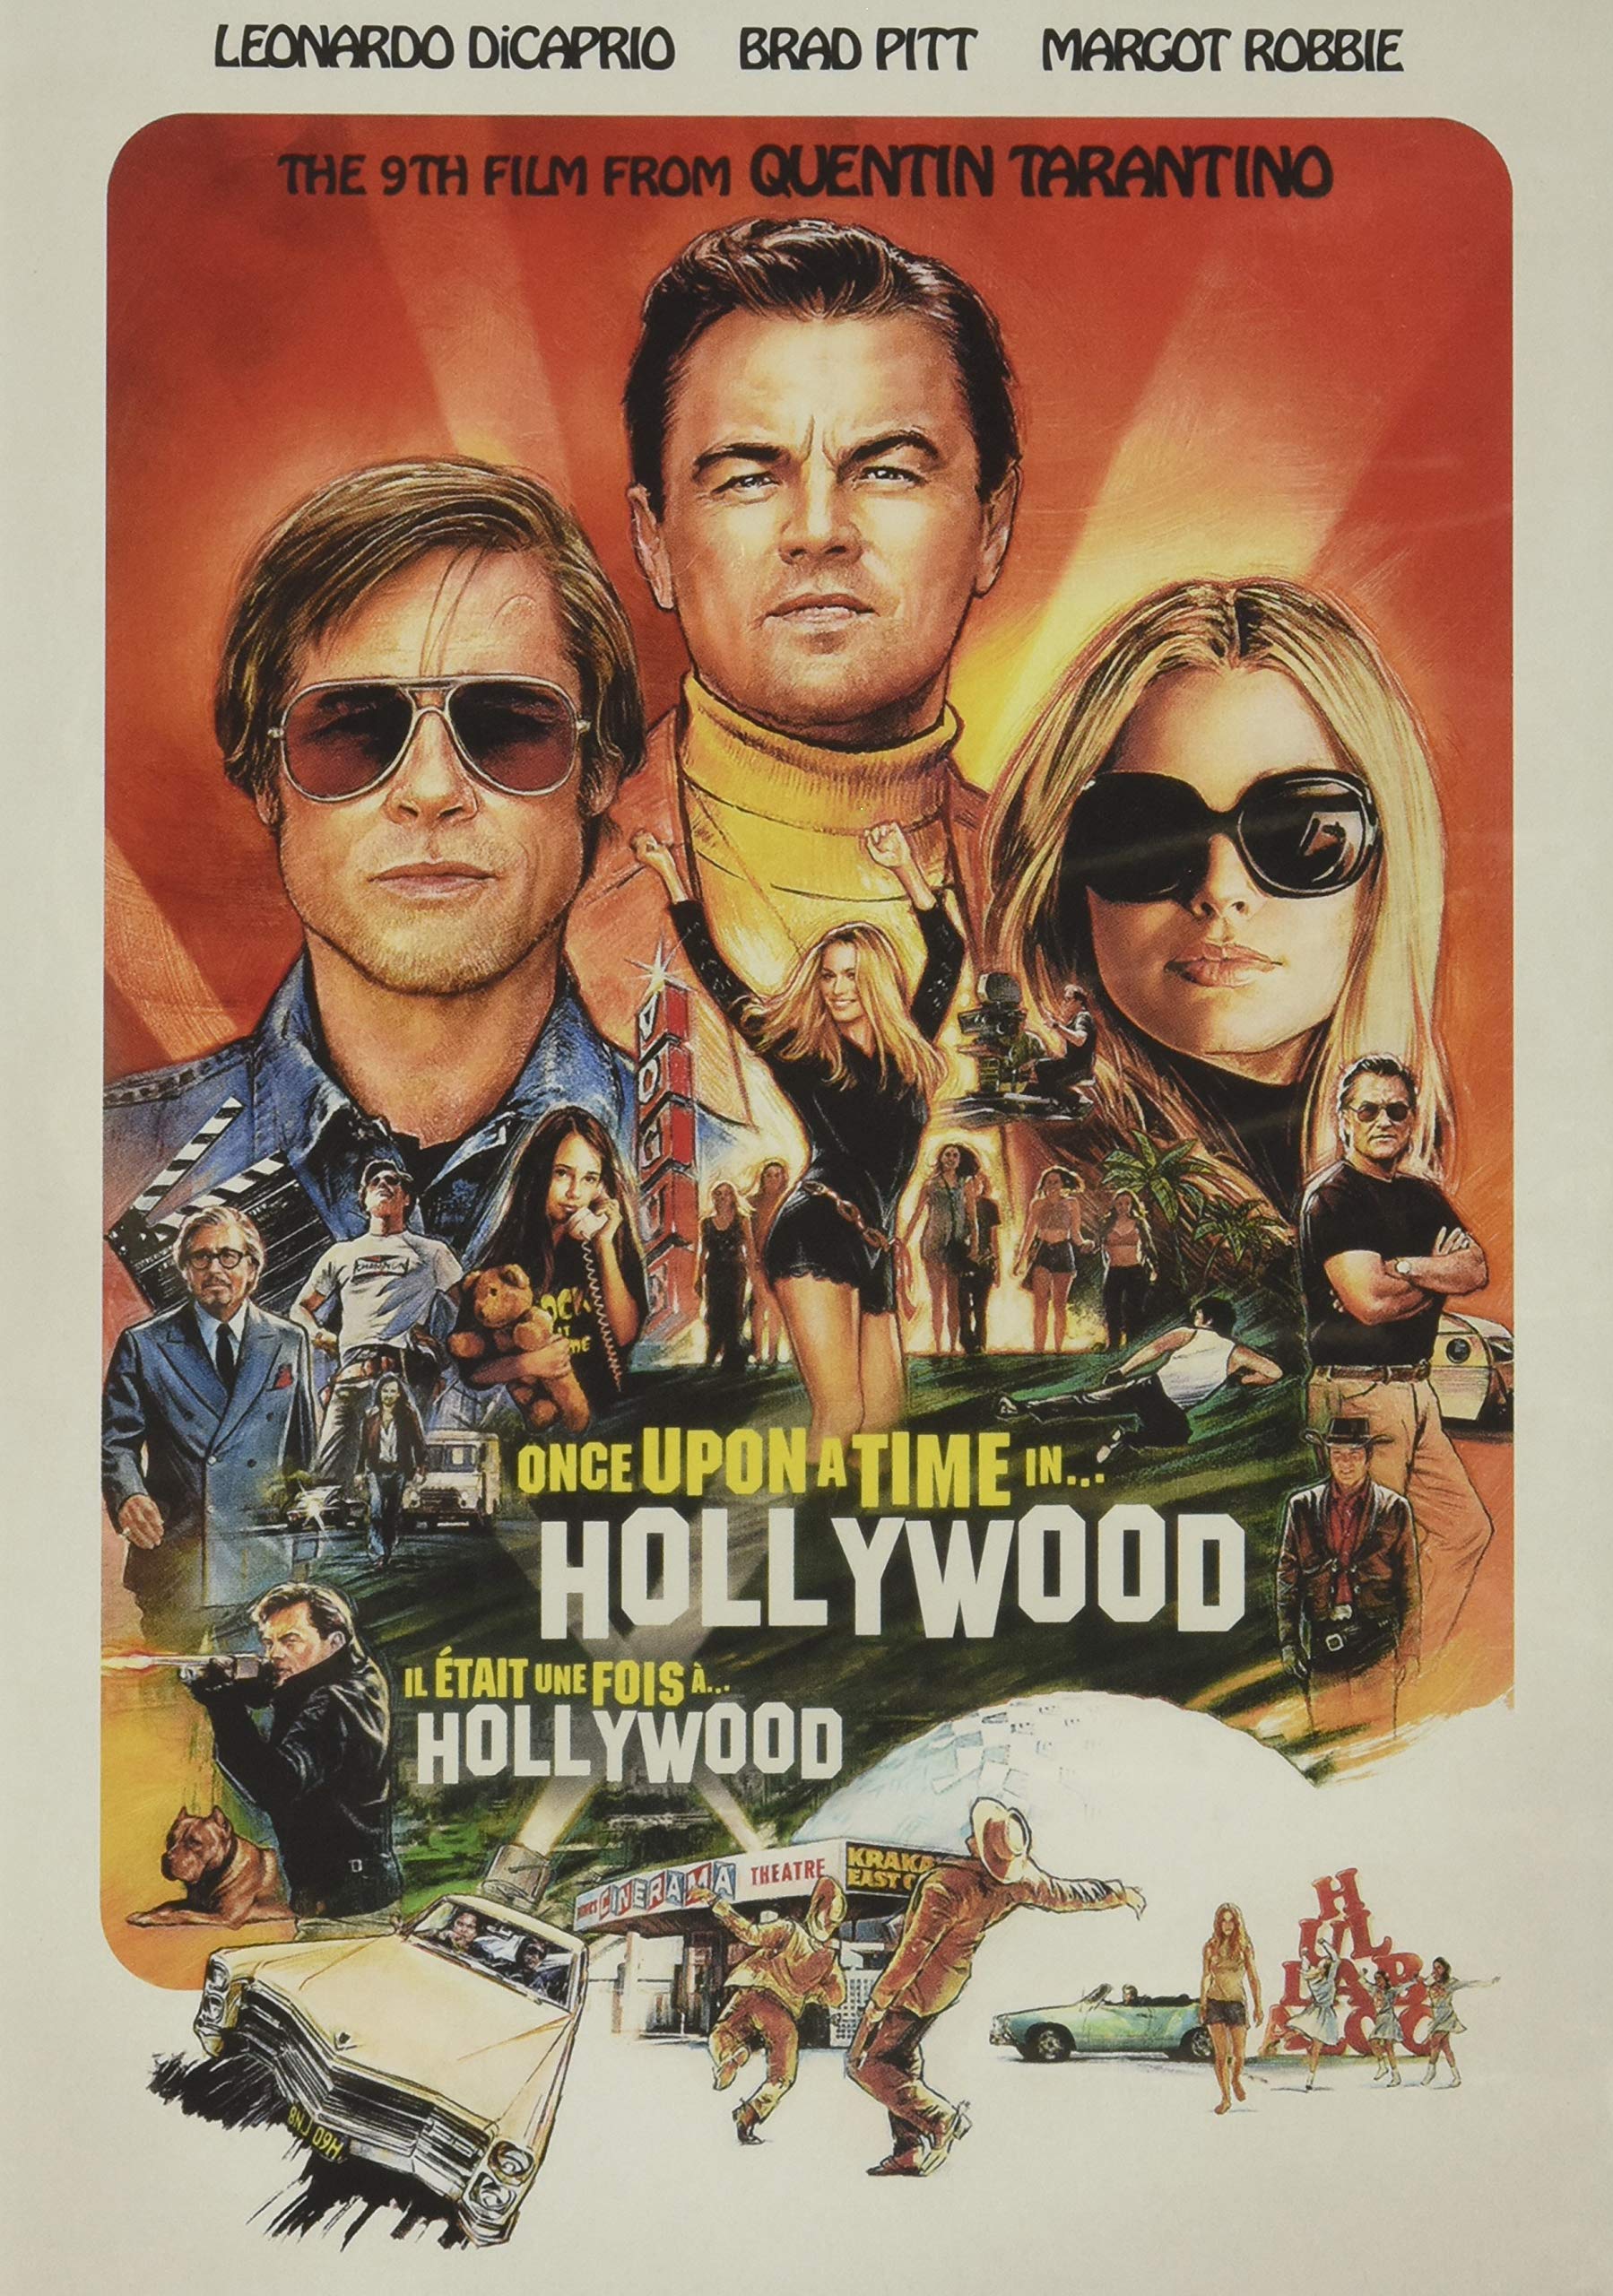 ONCE UPON A TIME IN HOLLYWOOD on MovieShack